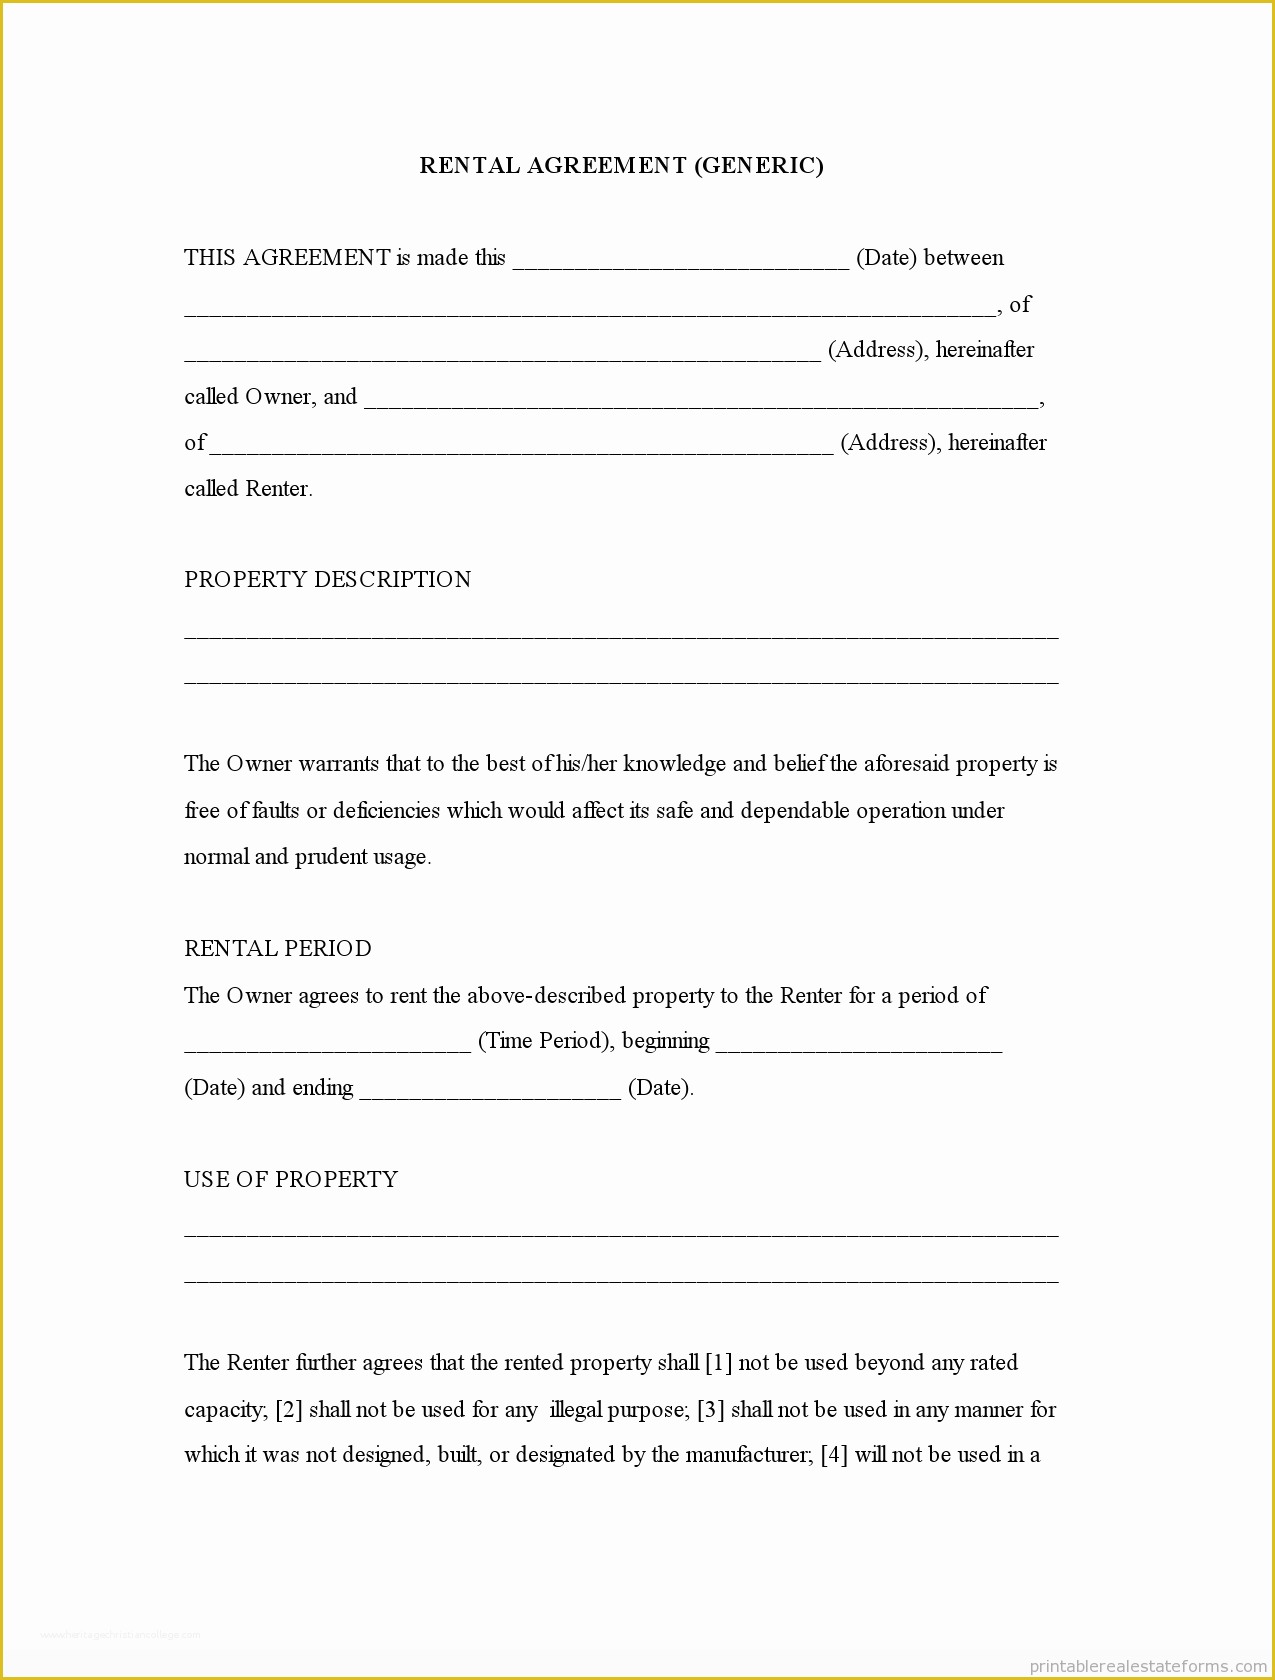 Rental Template Free Of Generic Template Rental Agreement forms Free Printable